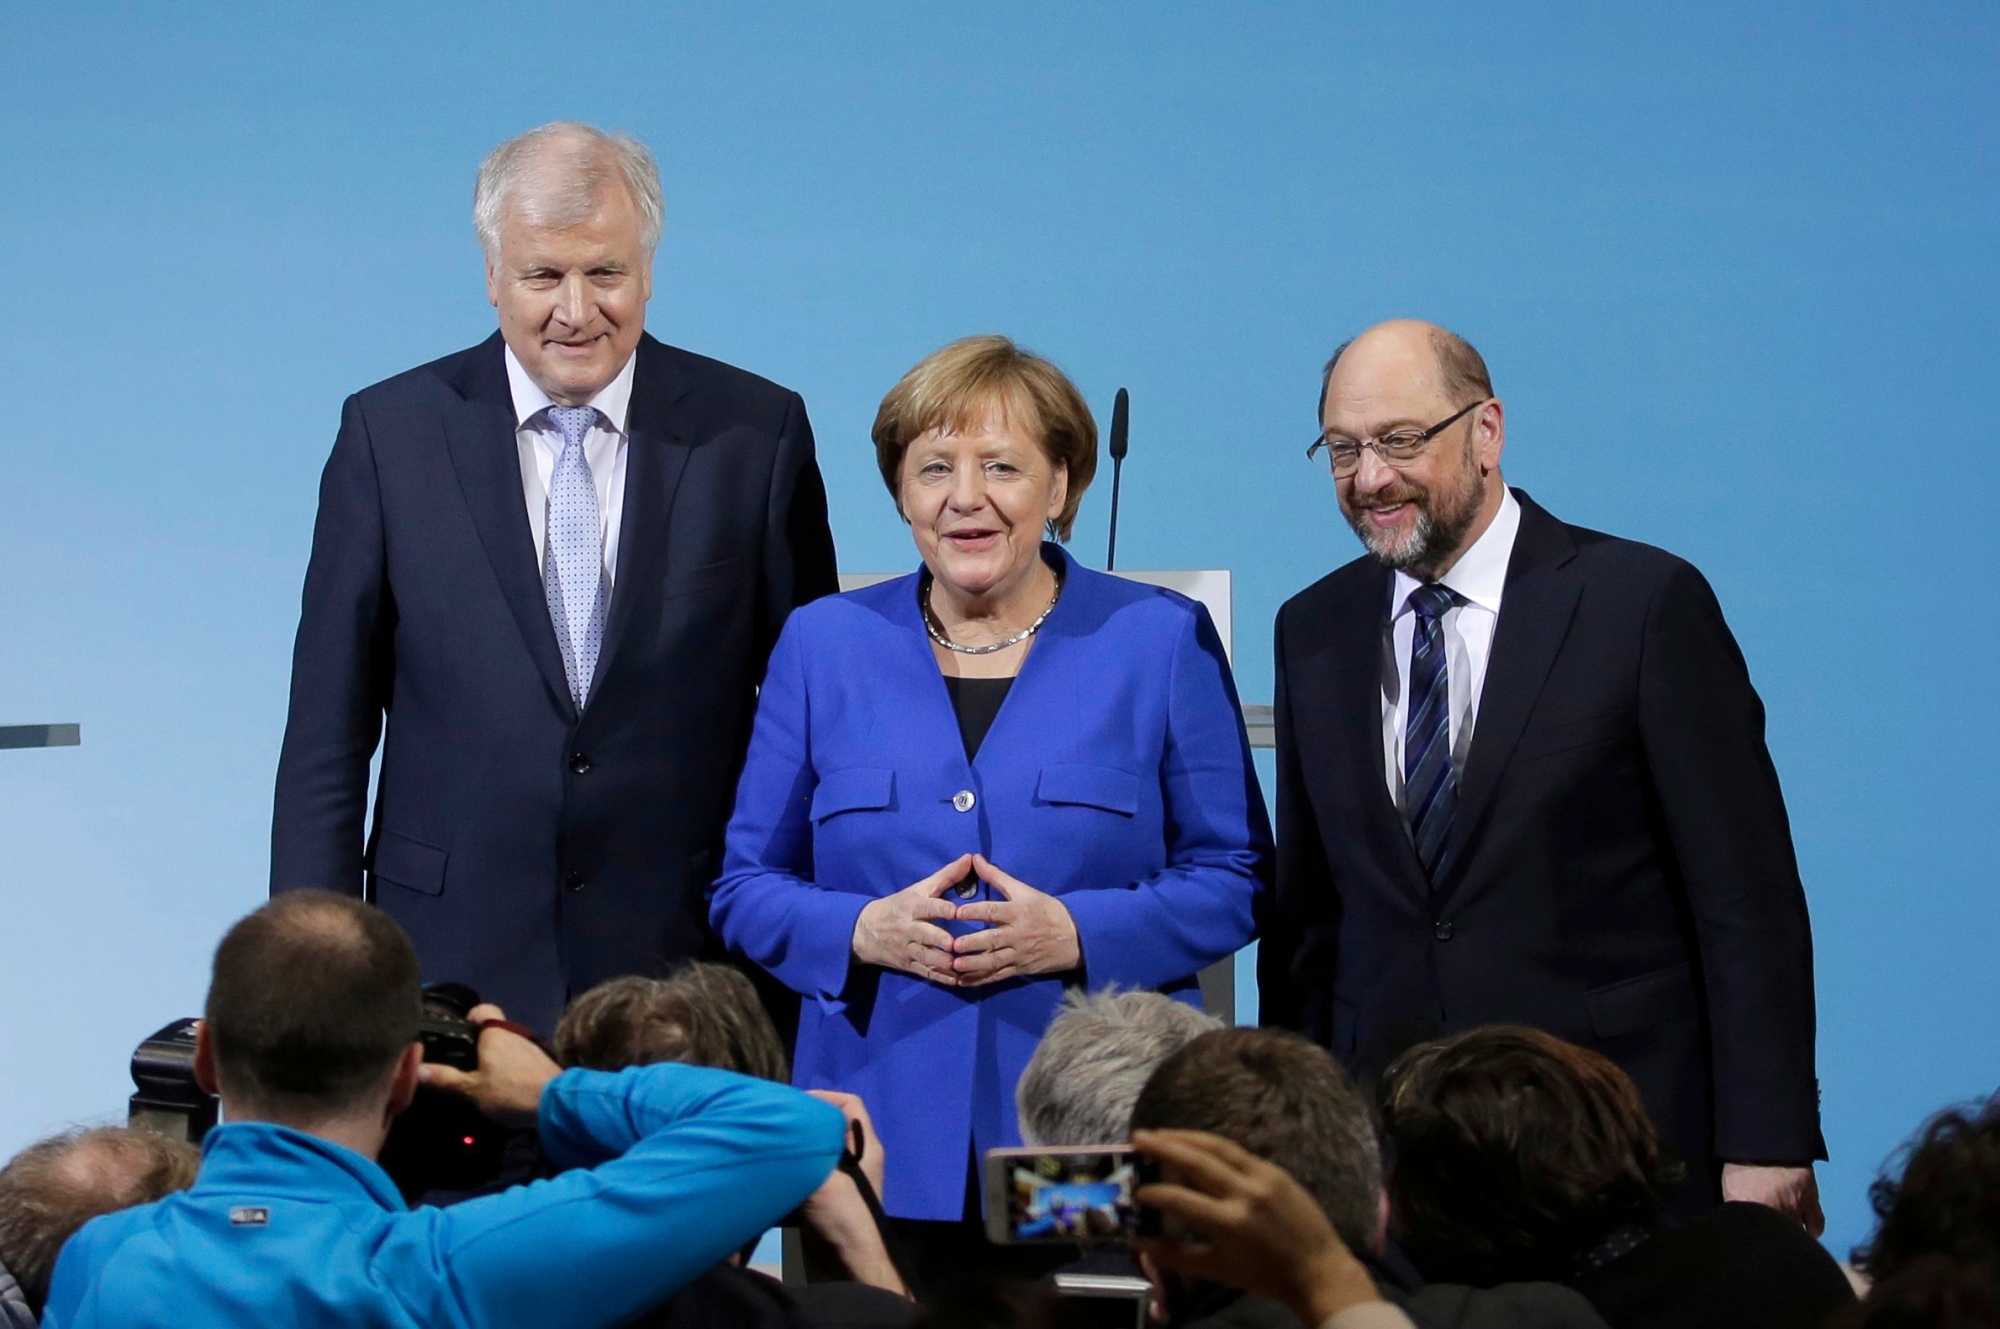 German Chancellor Angela Merkel is flanked by Bavarian governor Horst Seehofer, left, and Social Democratic Party Chairman Martin Schulz as they pose for a photo after the exploratory talks between Merkel's Christian Democratic block and the Social Democrats on forming a new German government in Berlin, Germany, Friday, Jan. 12, 2018. (AP Photo/Markus Schreiber) Germany Politics